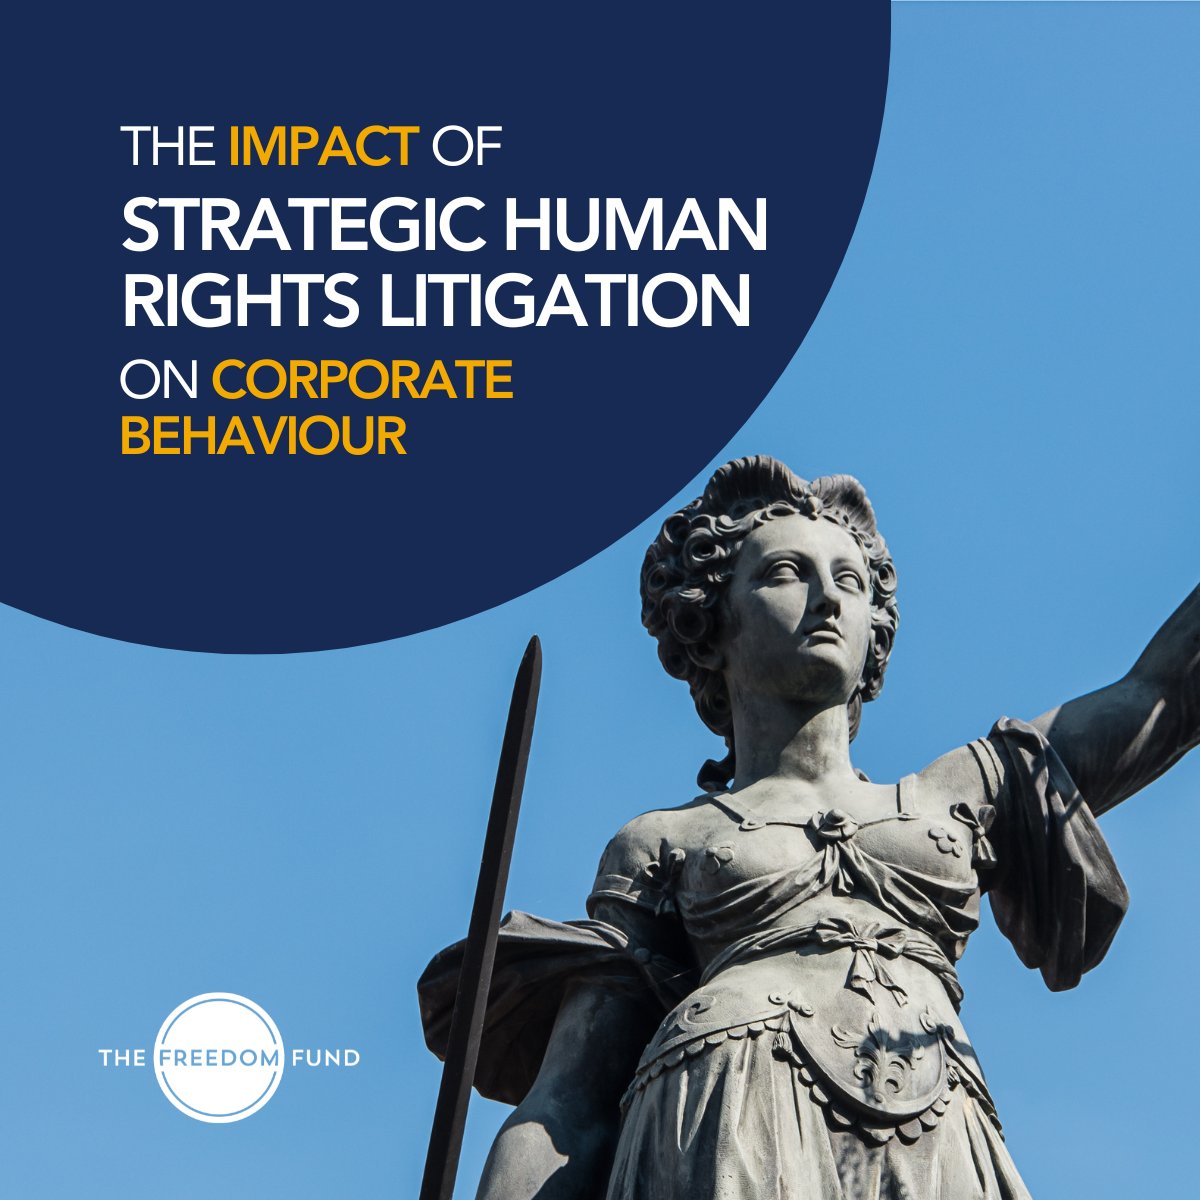 Our NEW REPORT on the impacts of #StrategicLitigation on corporate conduct is here! By @ProfSuryaDeva, @justine_nolan, @Ebony_Birchall, it unveils an original Impact Framework & includes key insights for CSOs, corporations, governments, & donors. ⬇️ freedomfund.org/our-reports/st…